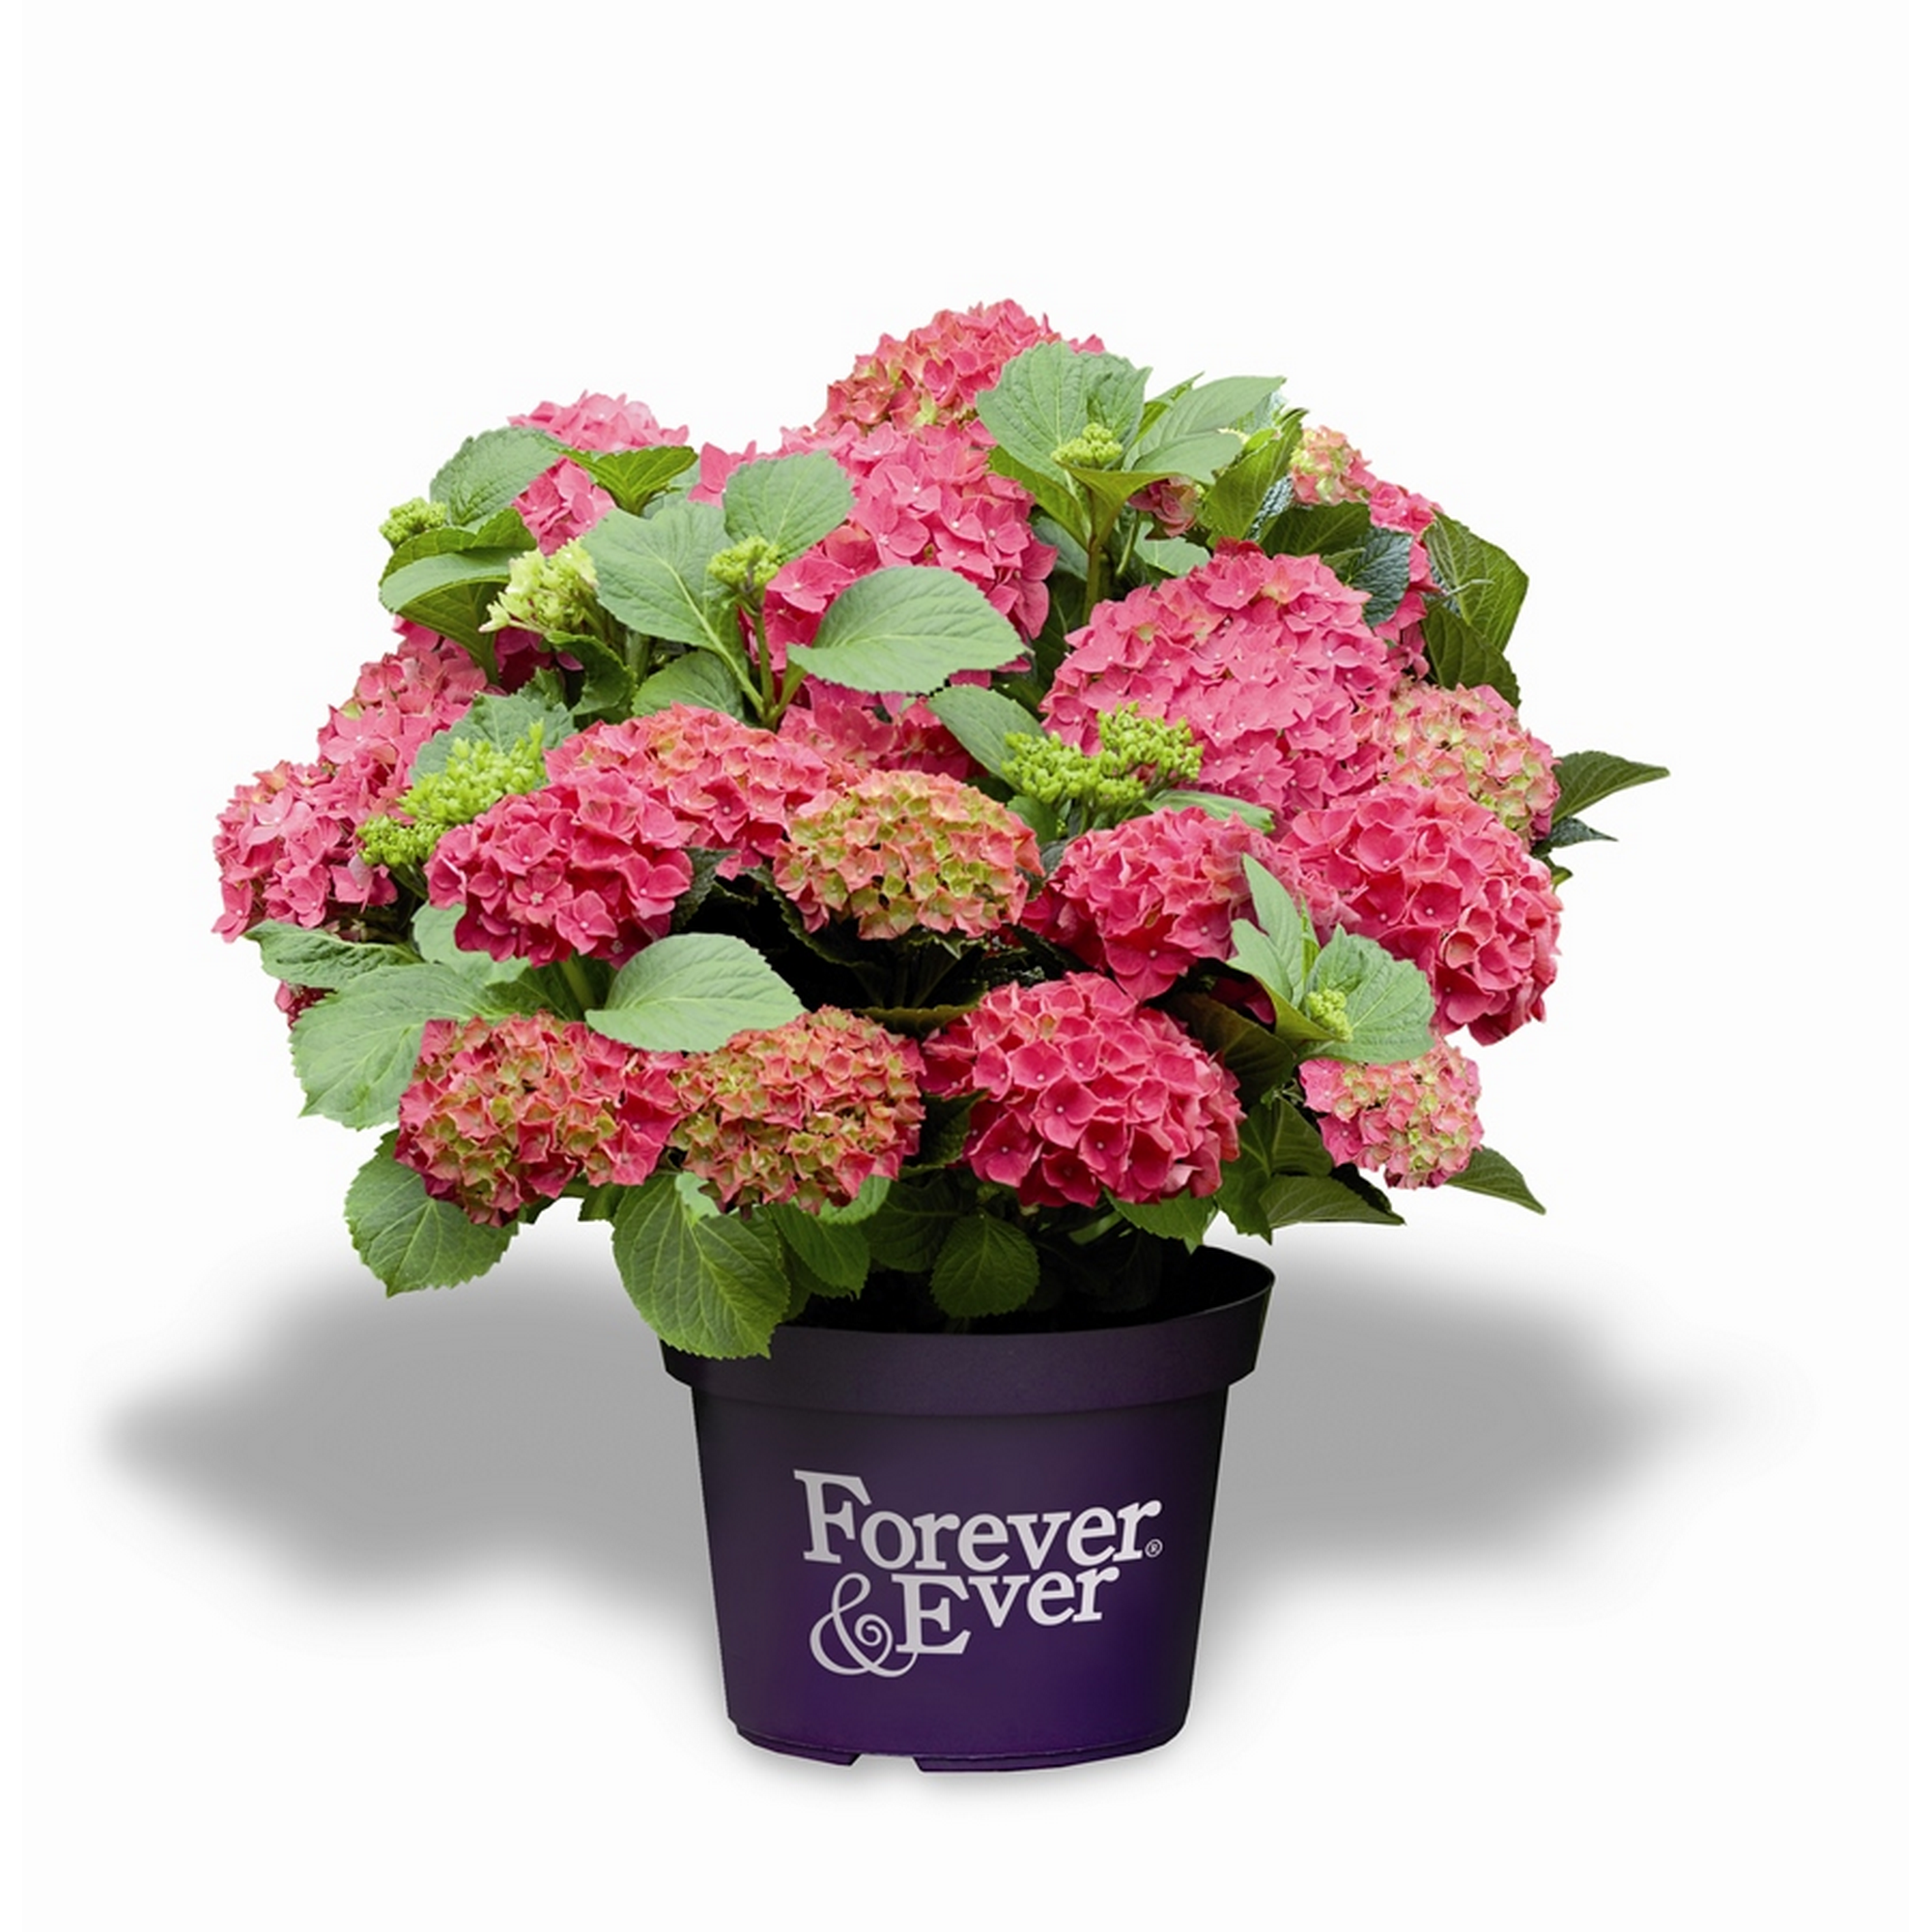 Hortensie 'Forever & Ever®' rot, Topf Ø 23 cm + product picture